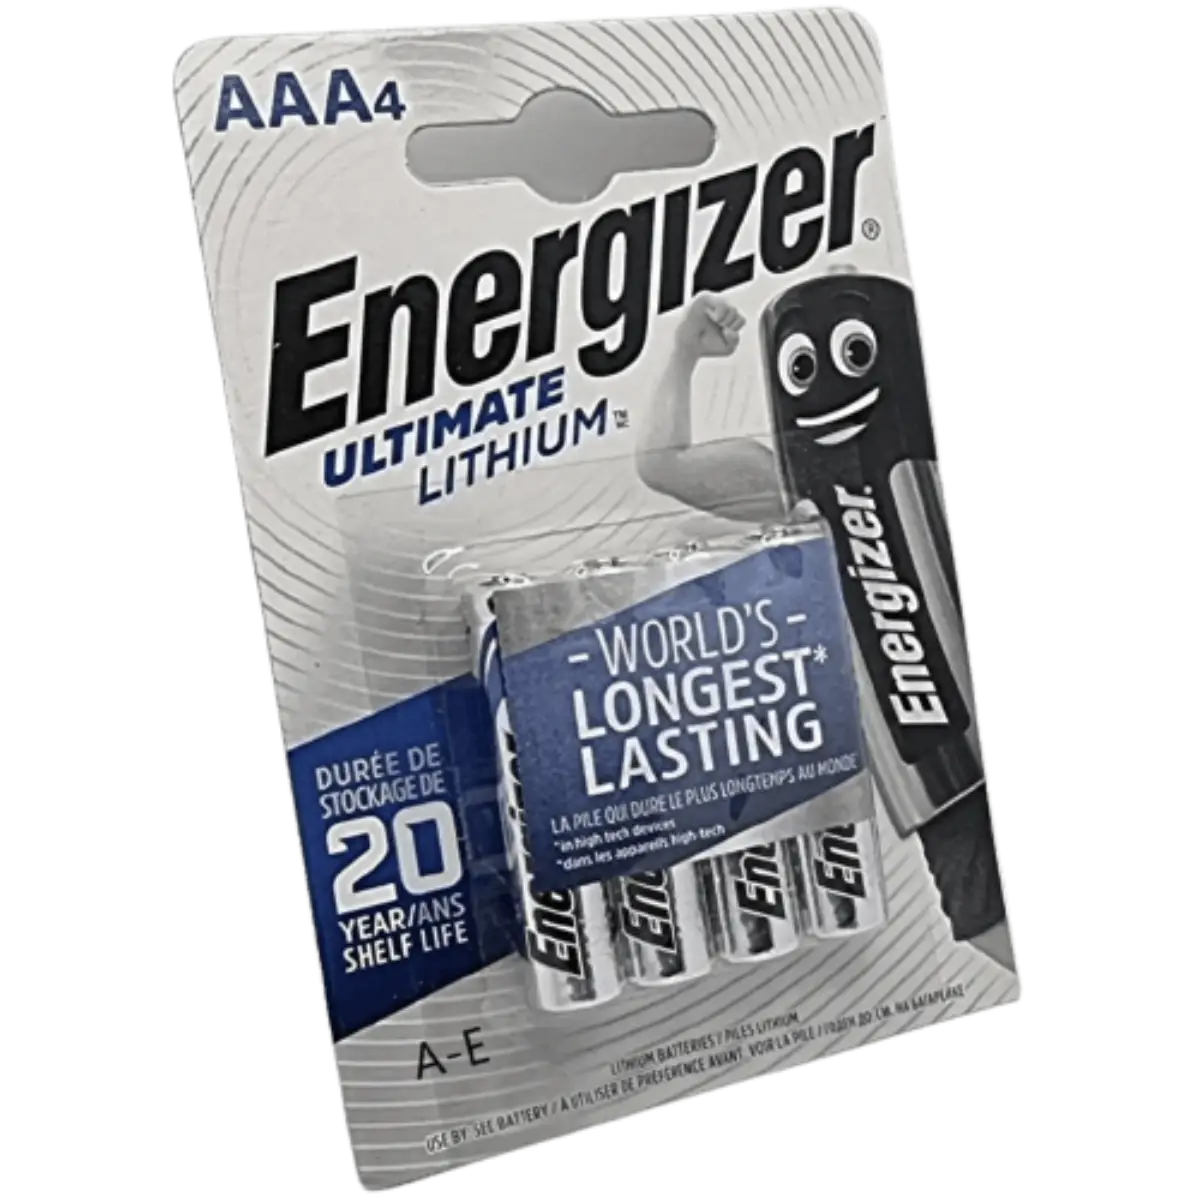 4x Piles AAA 1.5V Lithium Energizer